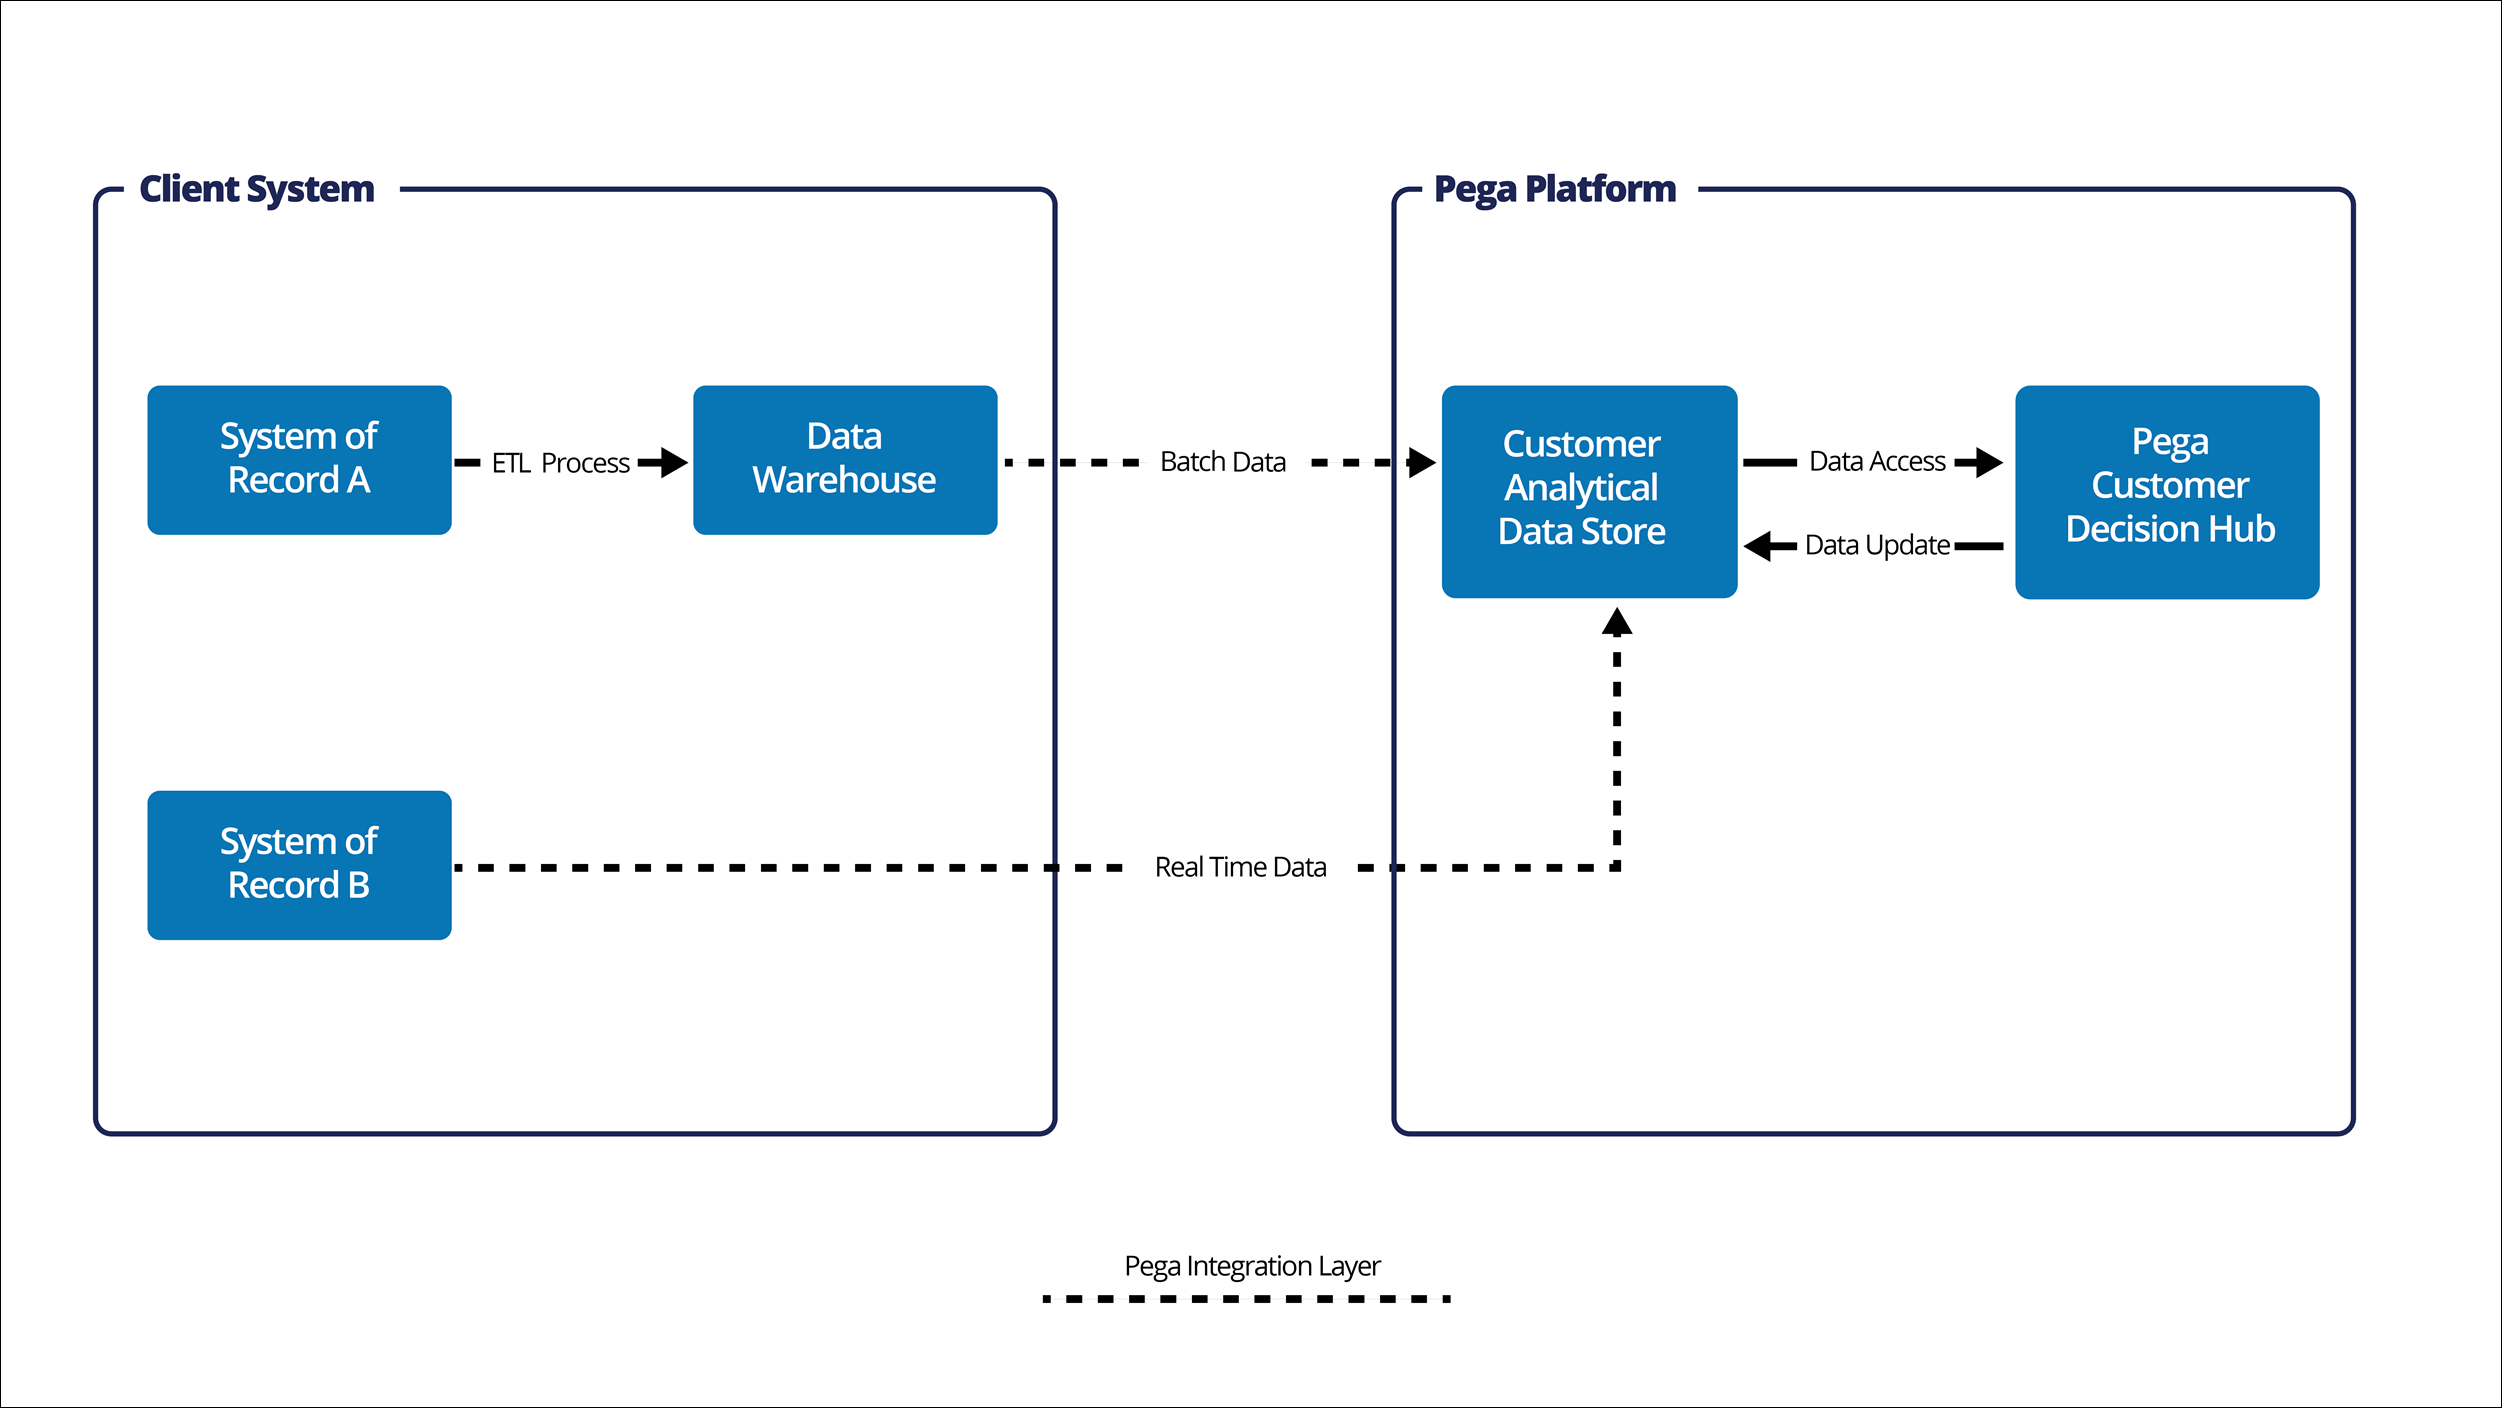 Diagram showing data integration layer components in the client system and Pega